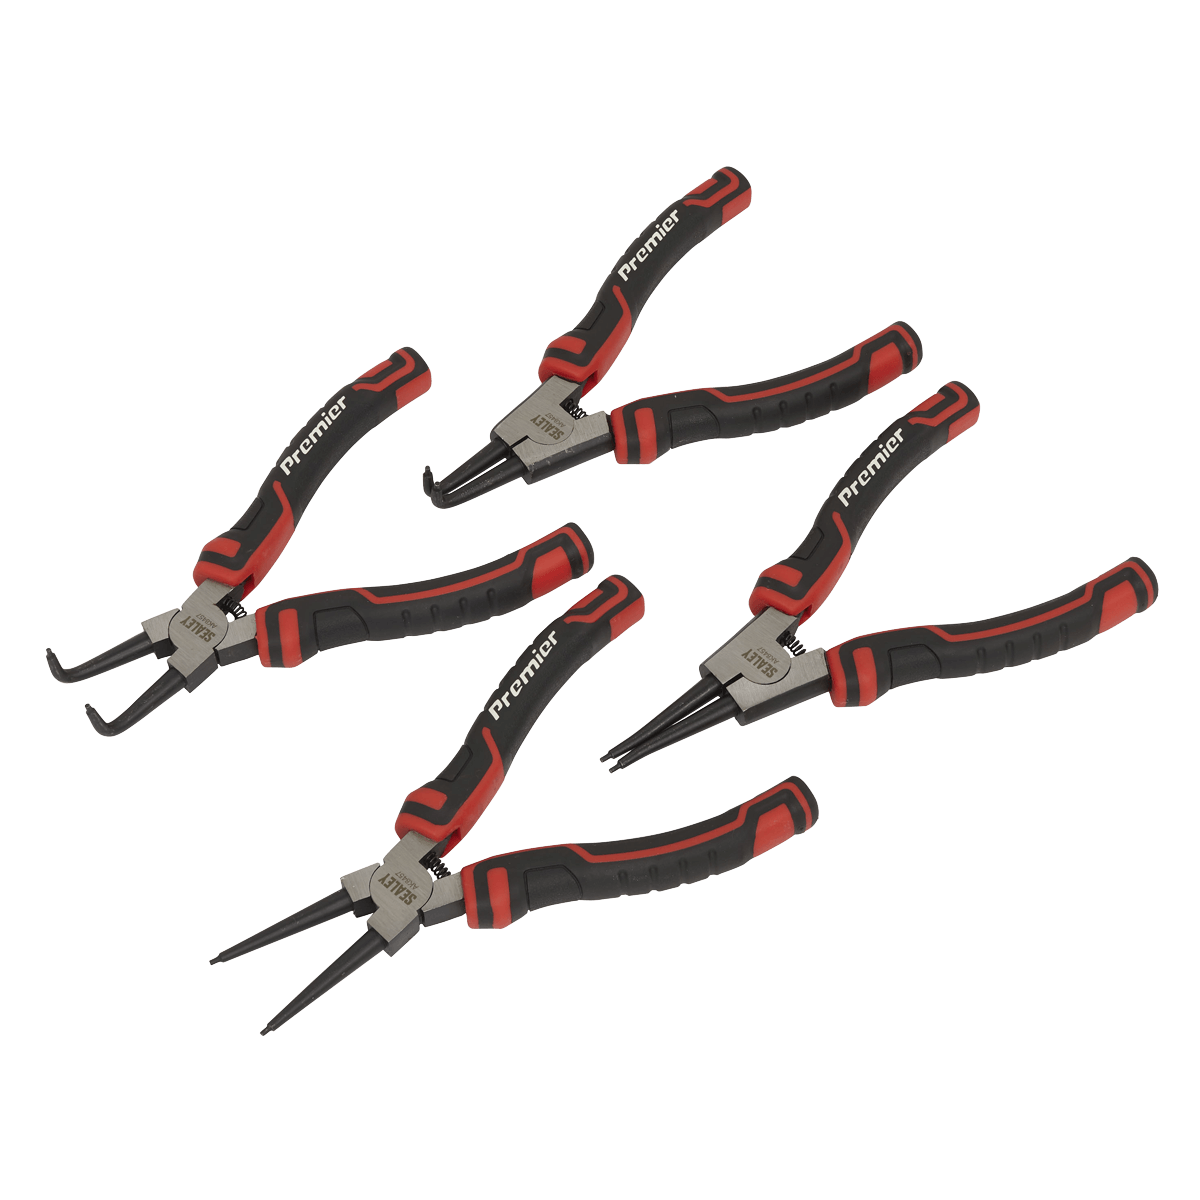 Sealey 4pc 180mm Circlip Pliers Set AK8457 | Manufactured from hardened and tempered Chrome Vanadium steel. | toolforce.ie